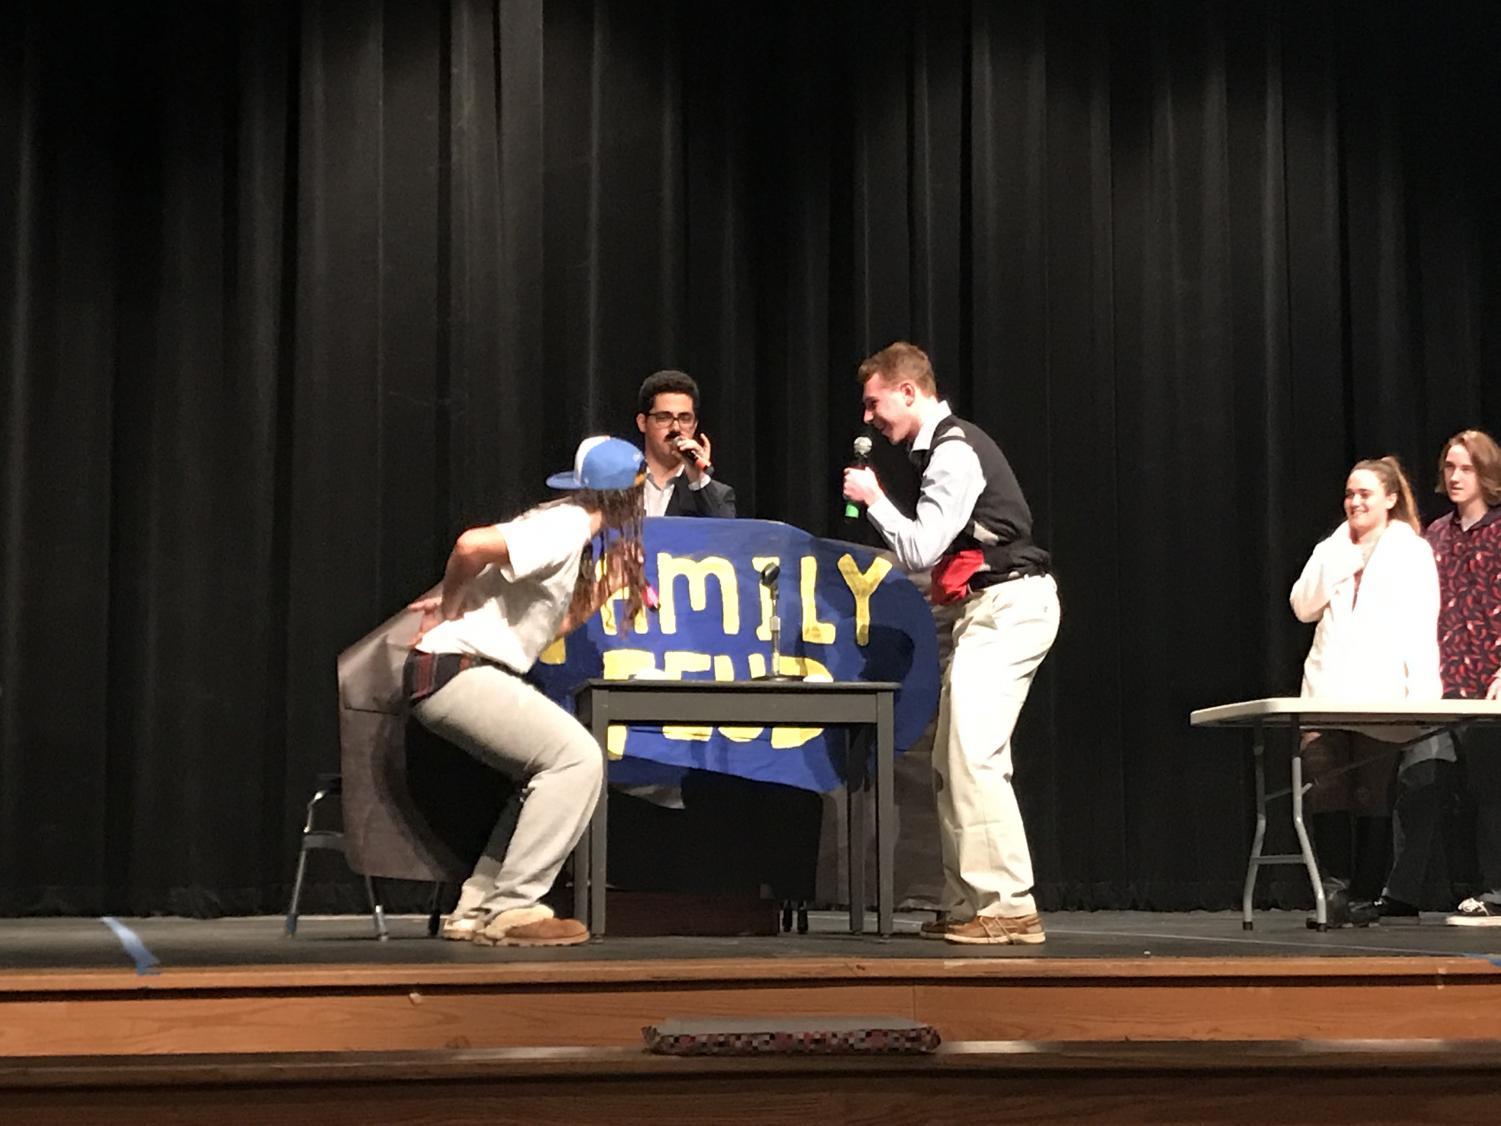 Family+Feud+Fundraising+Event